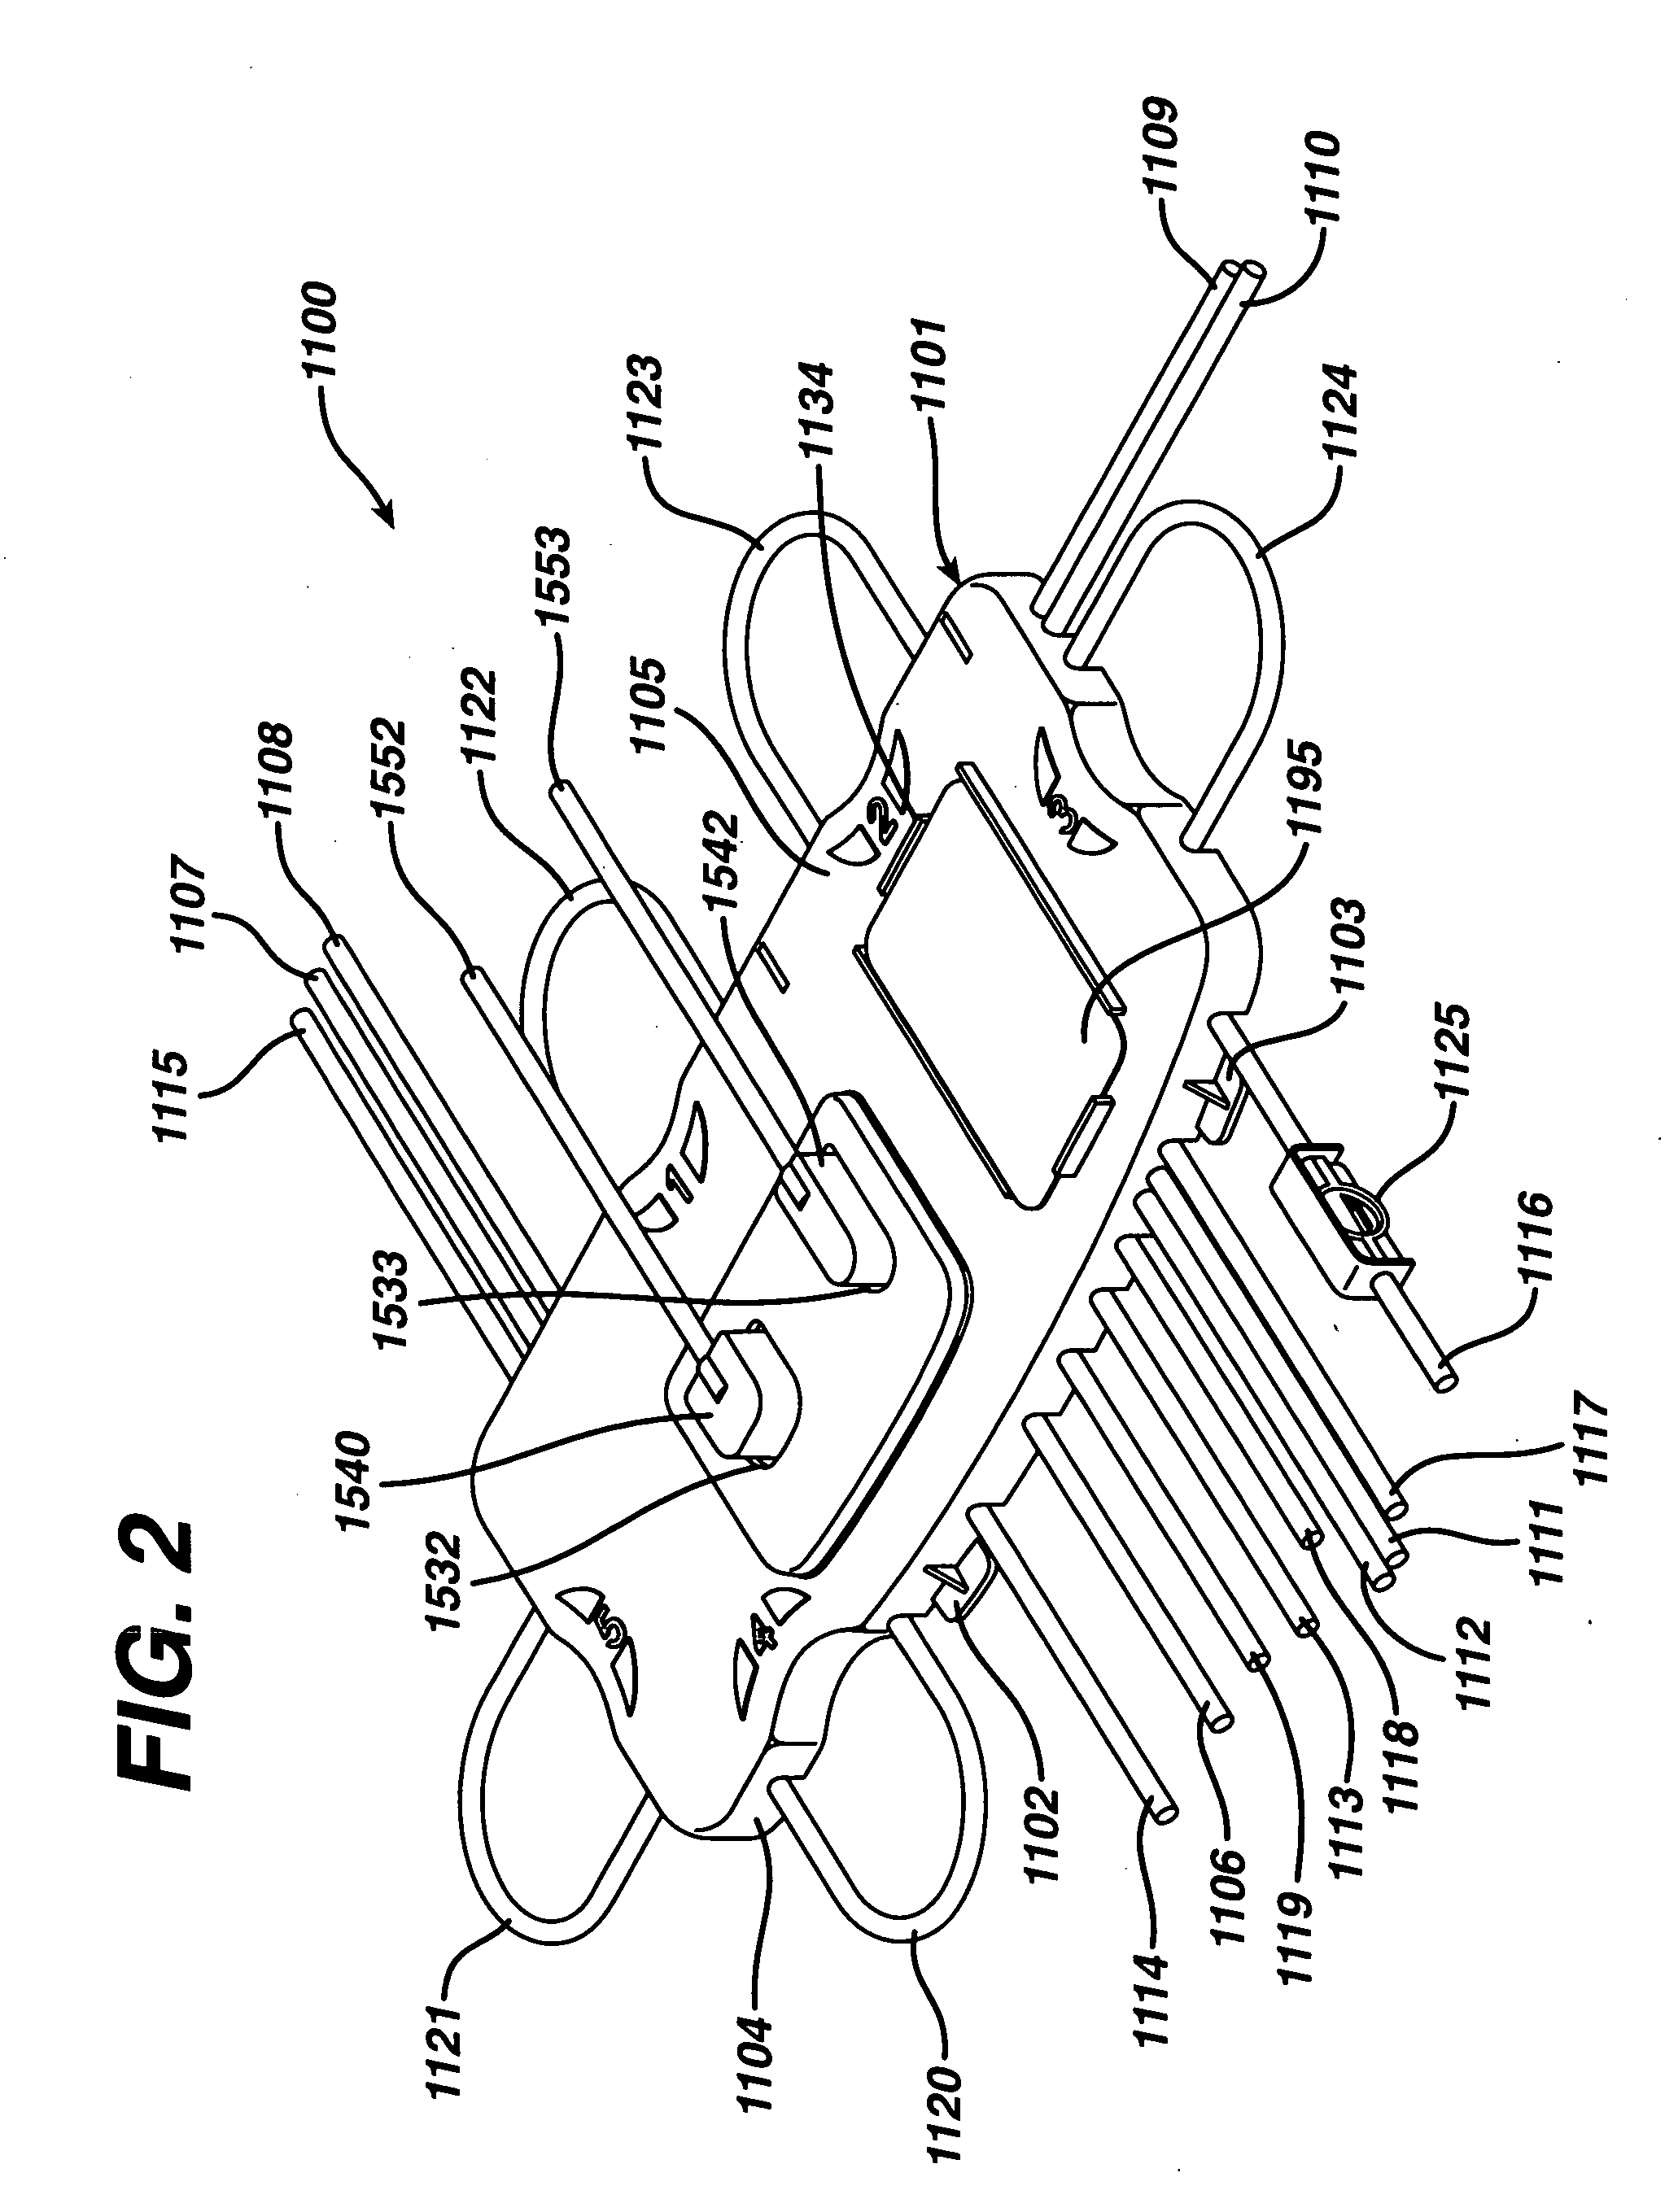 Control system for driving fluids through an extracorporeal blood circuit